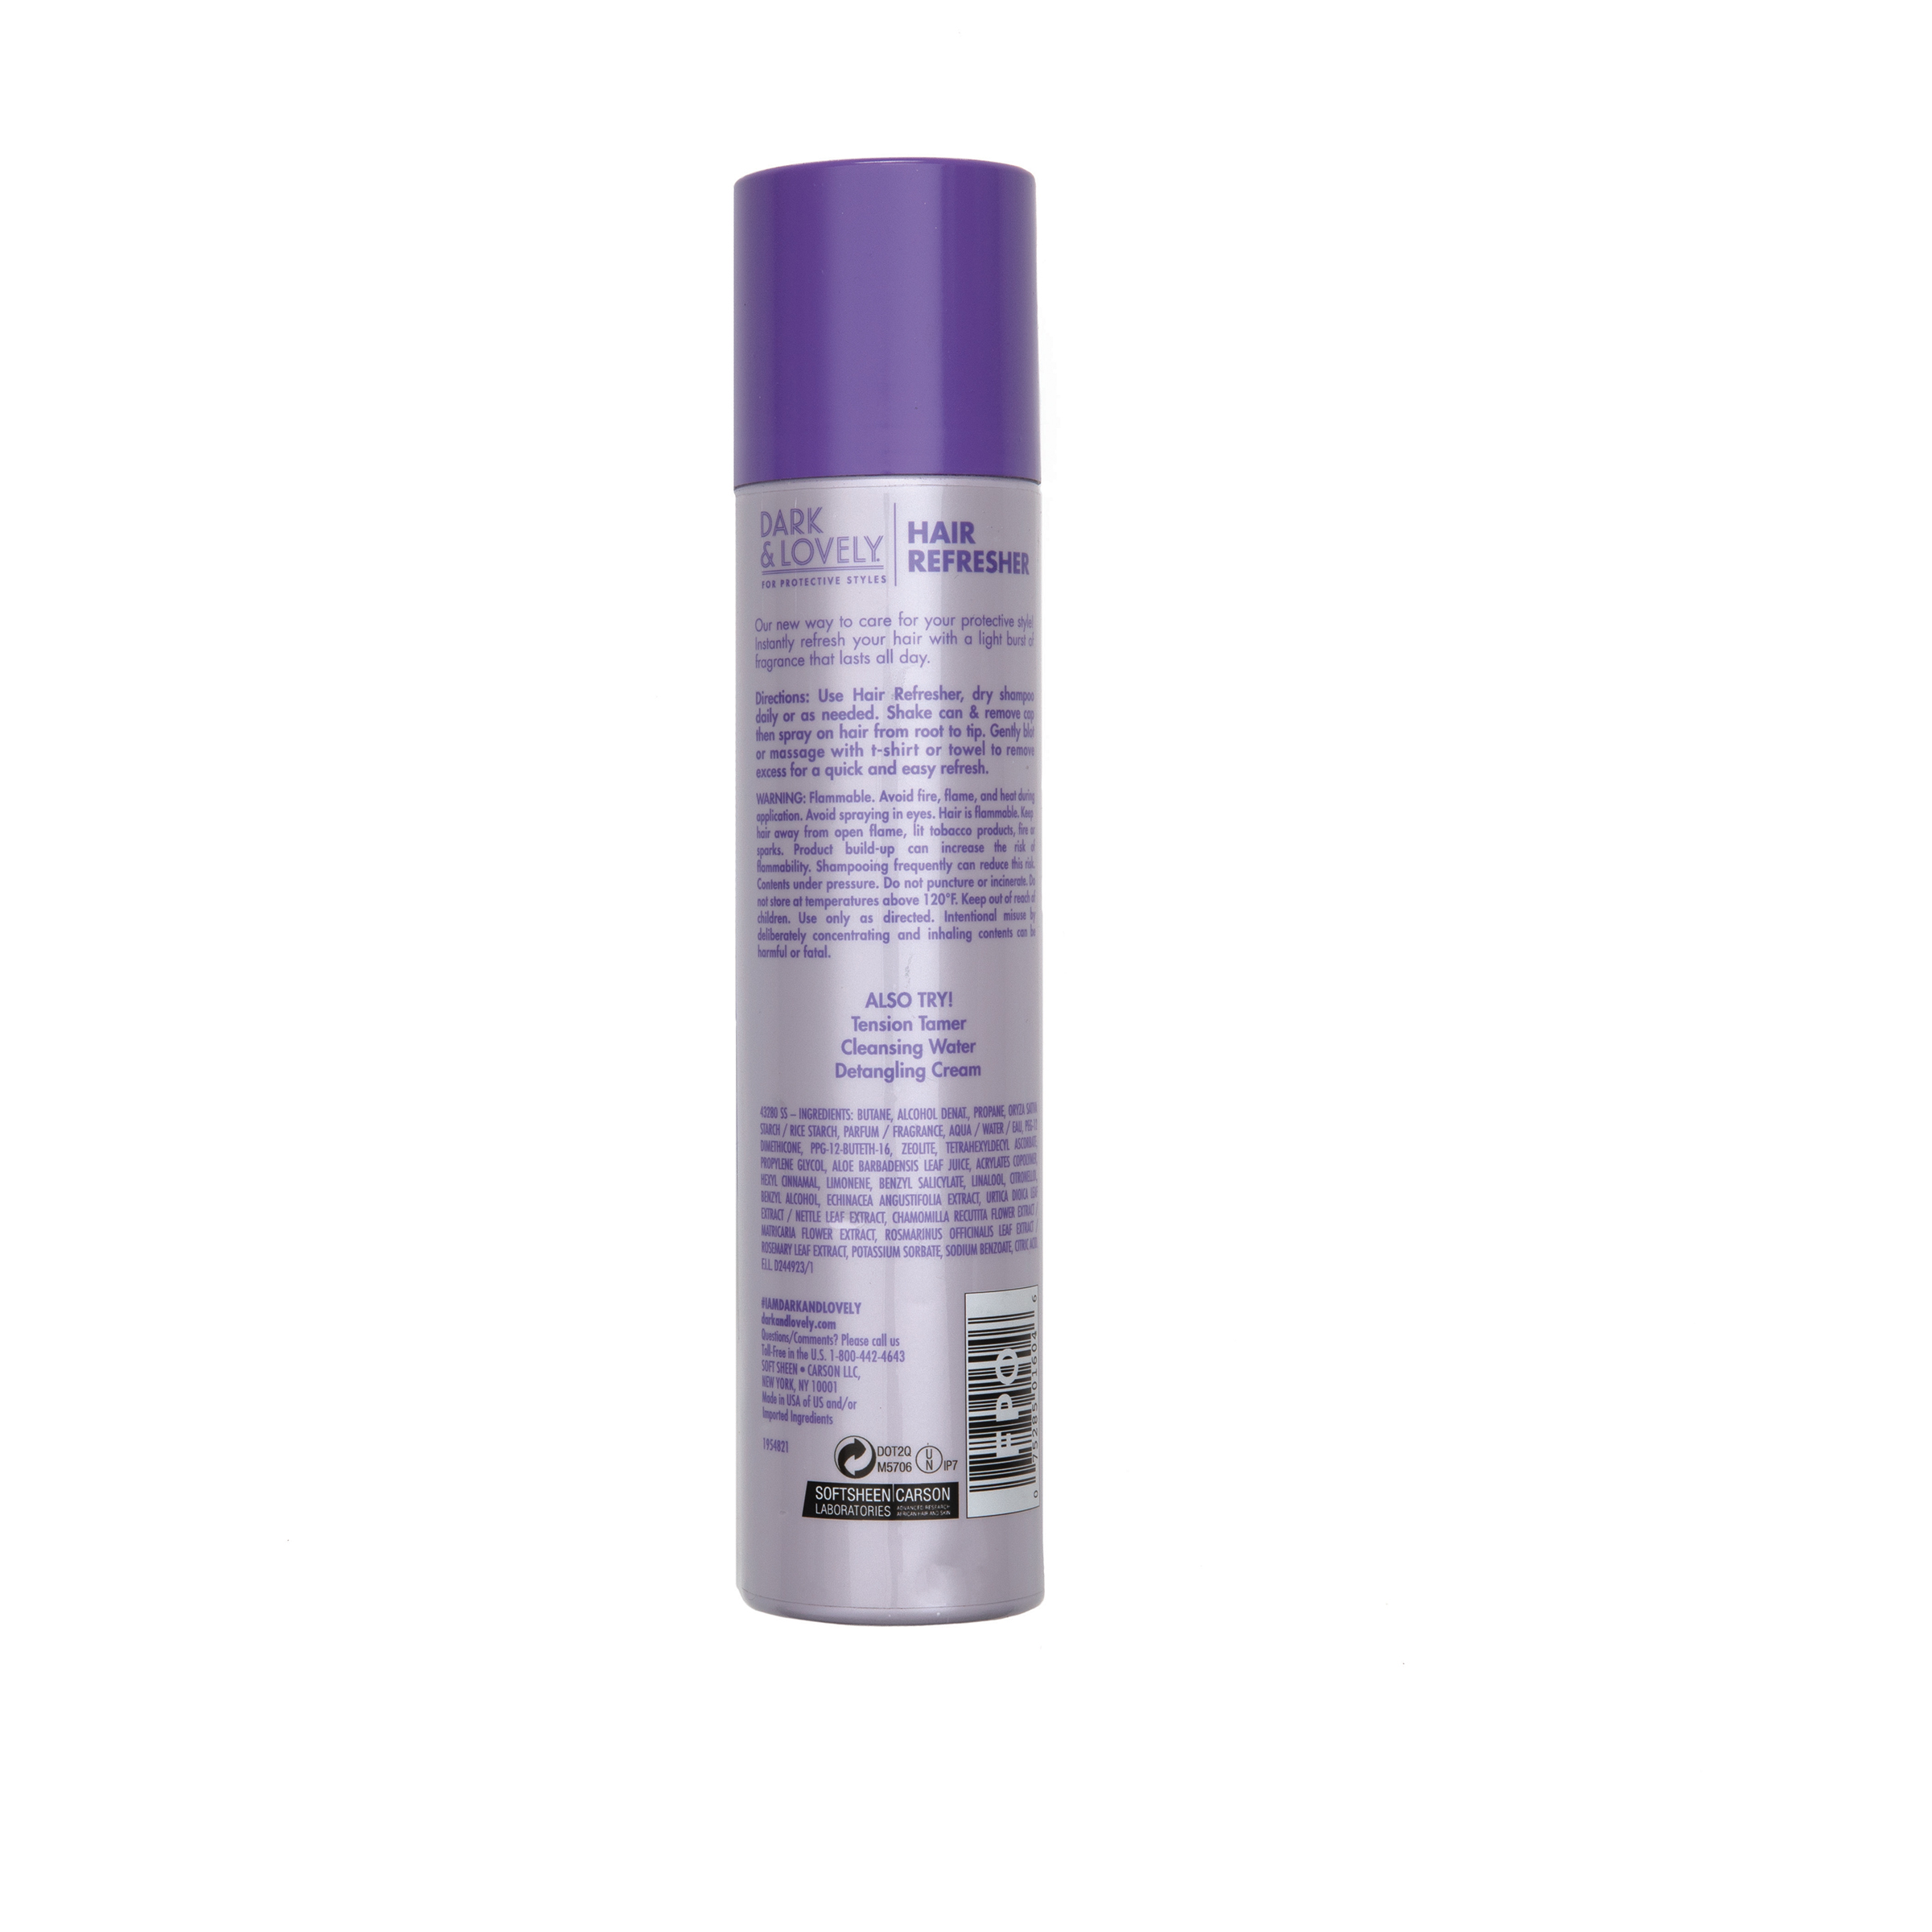 Dark and Lovely Detangling Refresher Hair Spray with Aloe, 3.4 oz - image 2 of 8